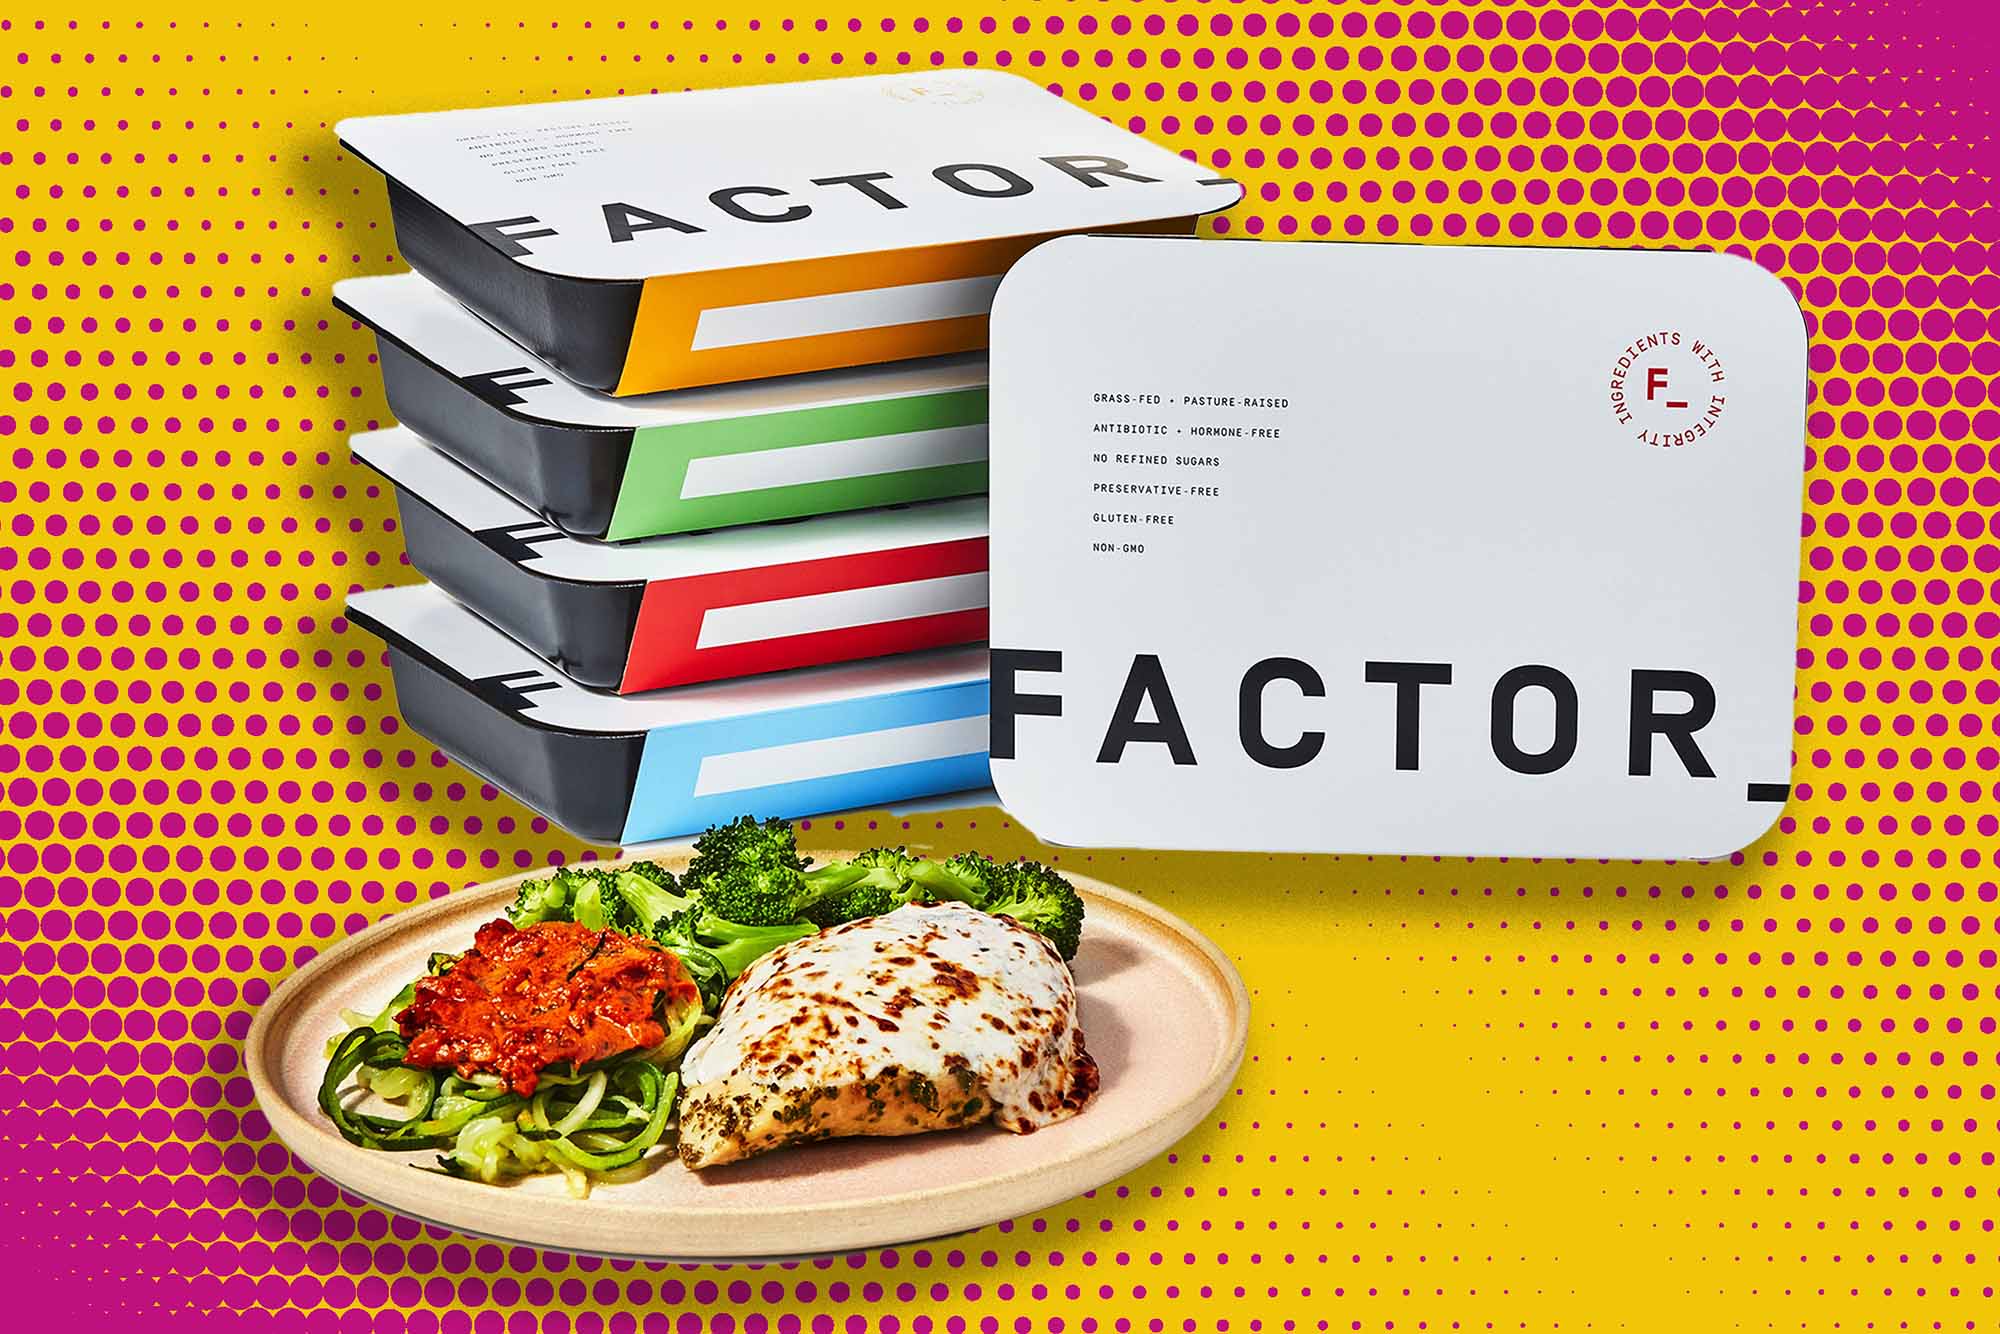 A stack of Factor meals on an orange and pink polkadot background